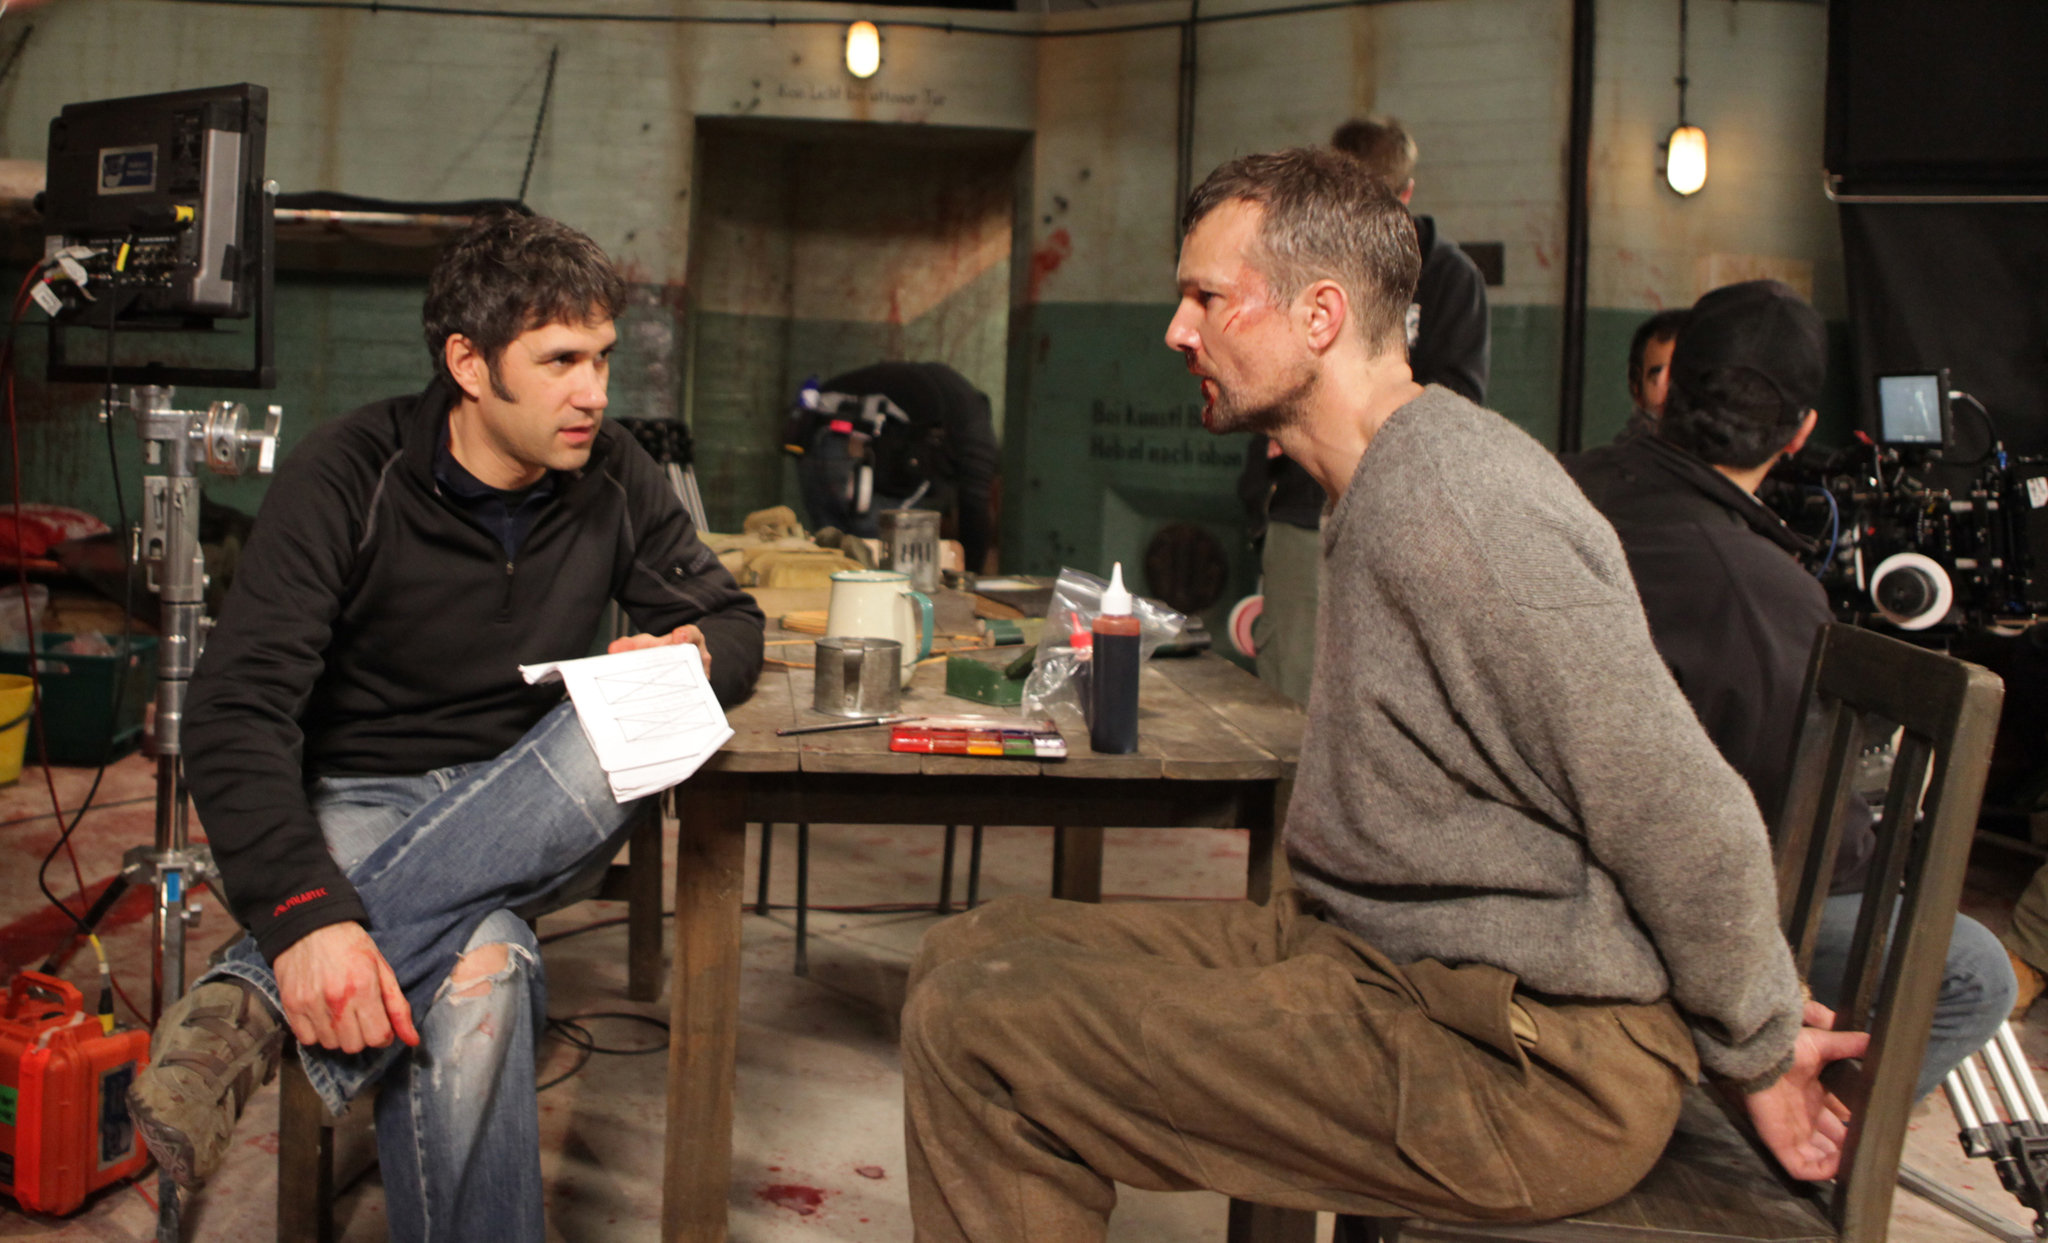 Behind the scenes still of Paul Campion and Craig Hall on the set of The Devil's Rock.